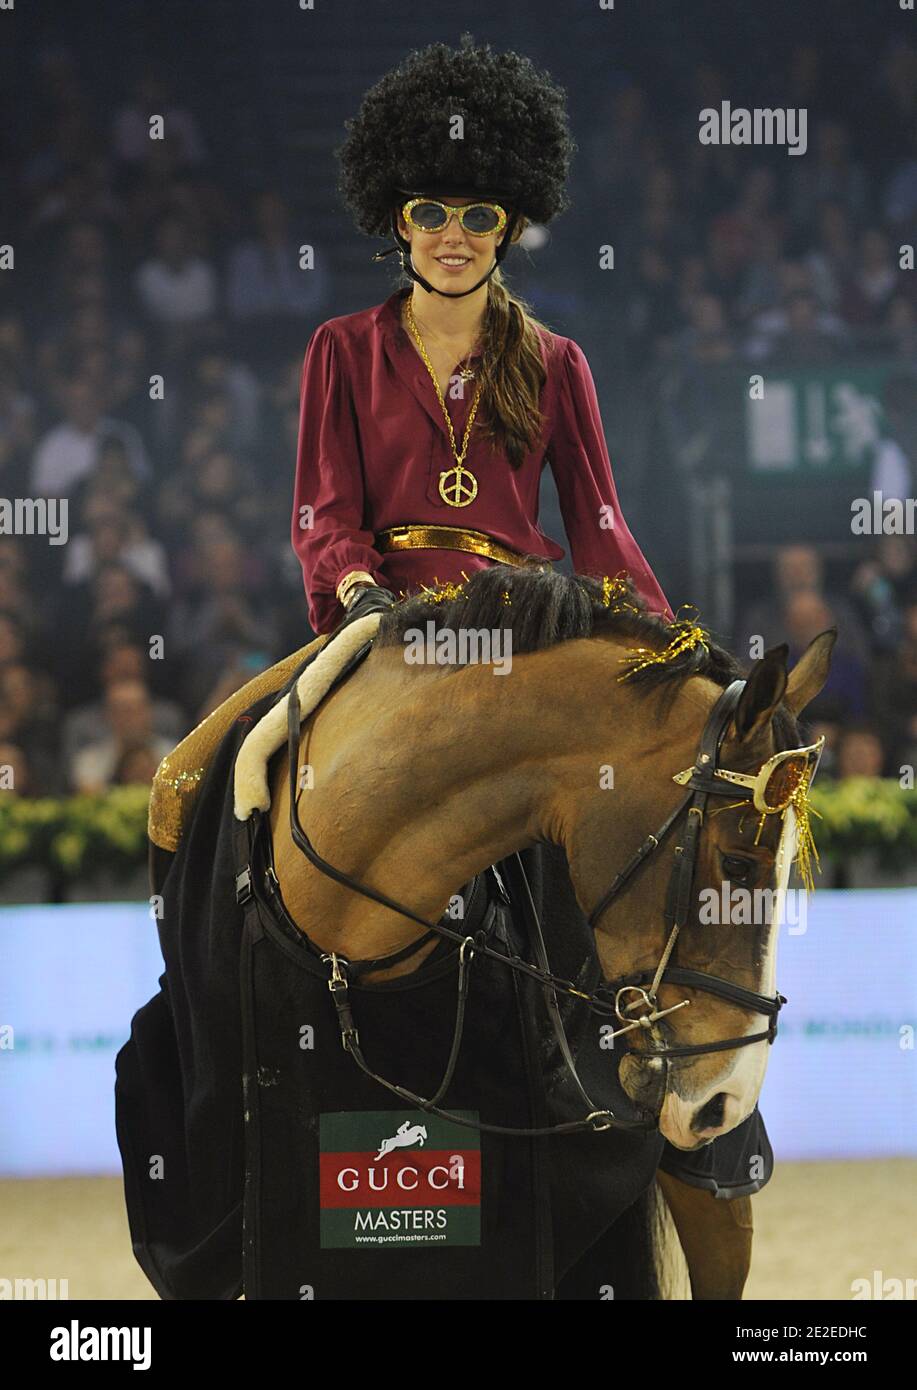 Caroline of Hanover and daughter Charlotte Casaraghi participates to at the Amade price during the Gucci Masters International Jumping Competition in Villepinte, North of Paris, France on December 3, 2011. Photo by Giancarlo Gorassini/ABACAPRESS.COM Stock Photo